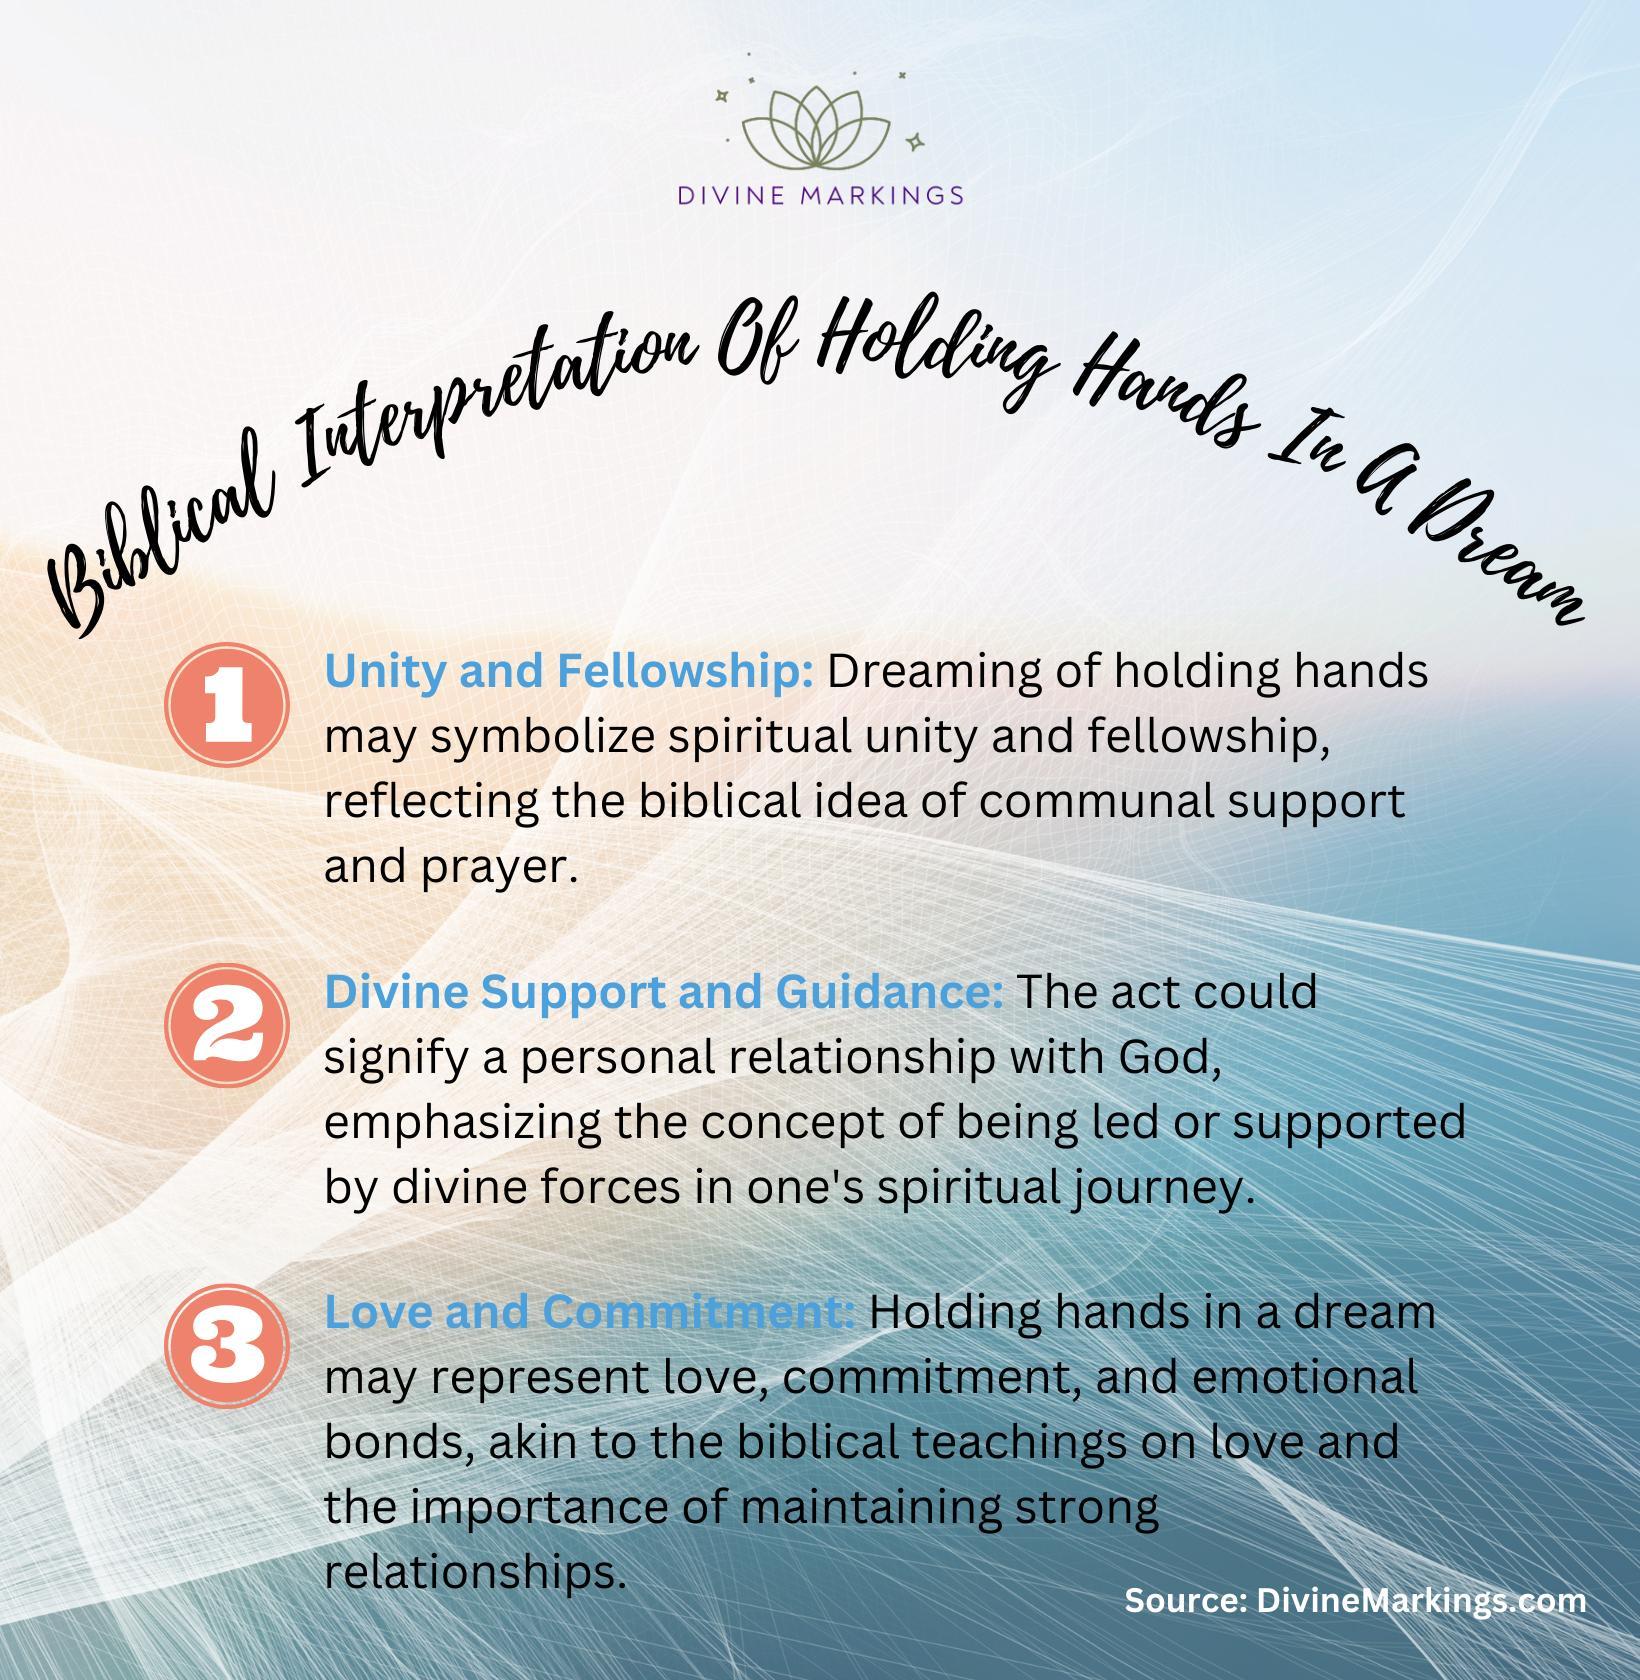 Biblical Interpretation Of Holding Hands In A Dream - infographic